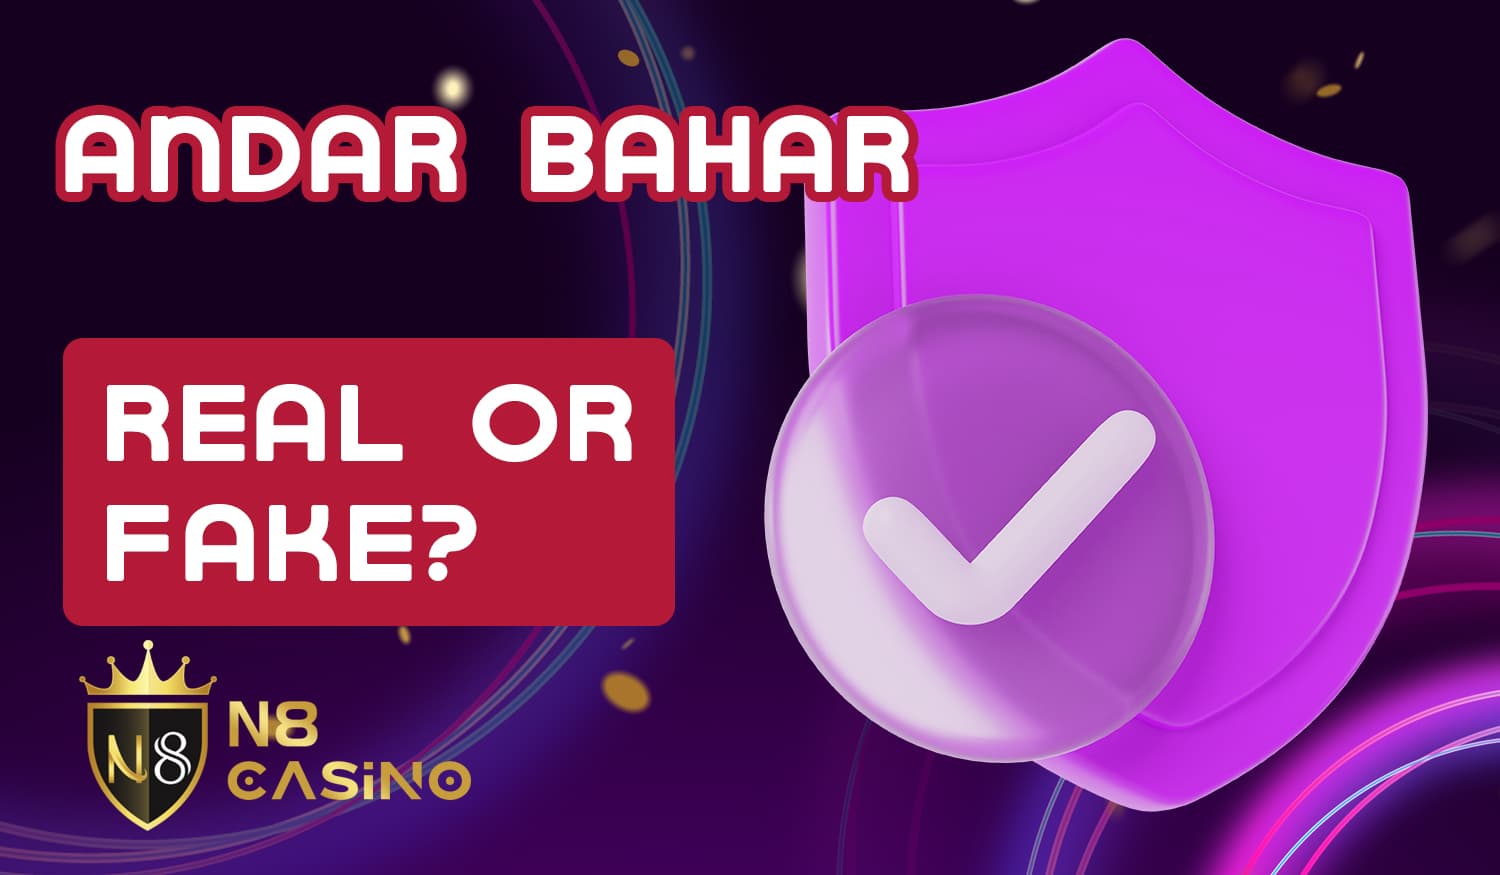 Is it safe to play at online casinos and Andar bahar on N8 Casino india site